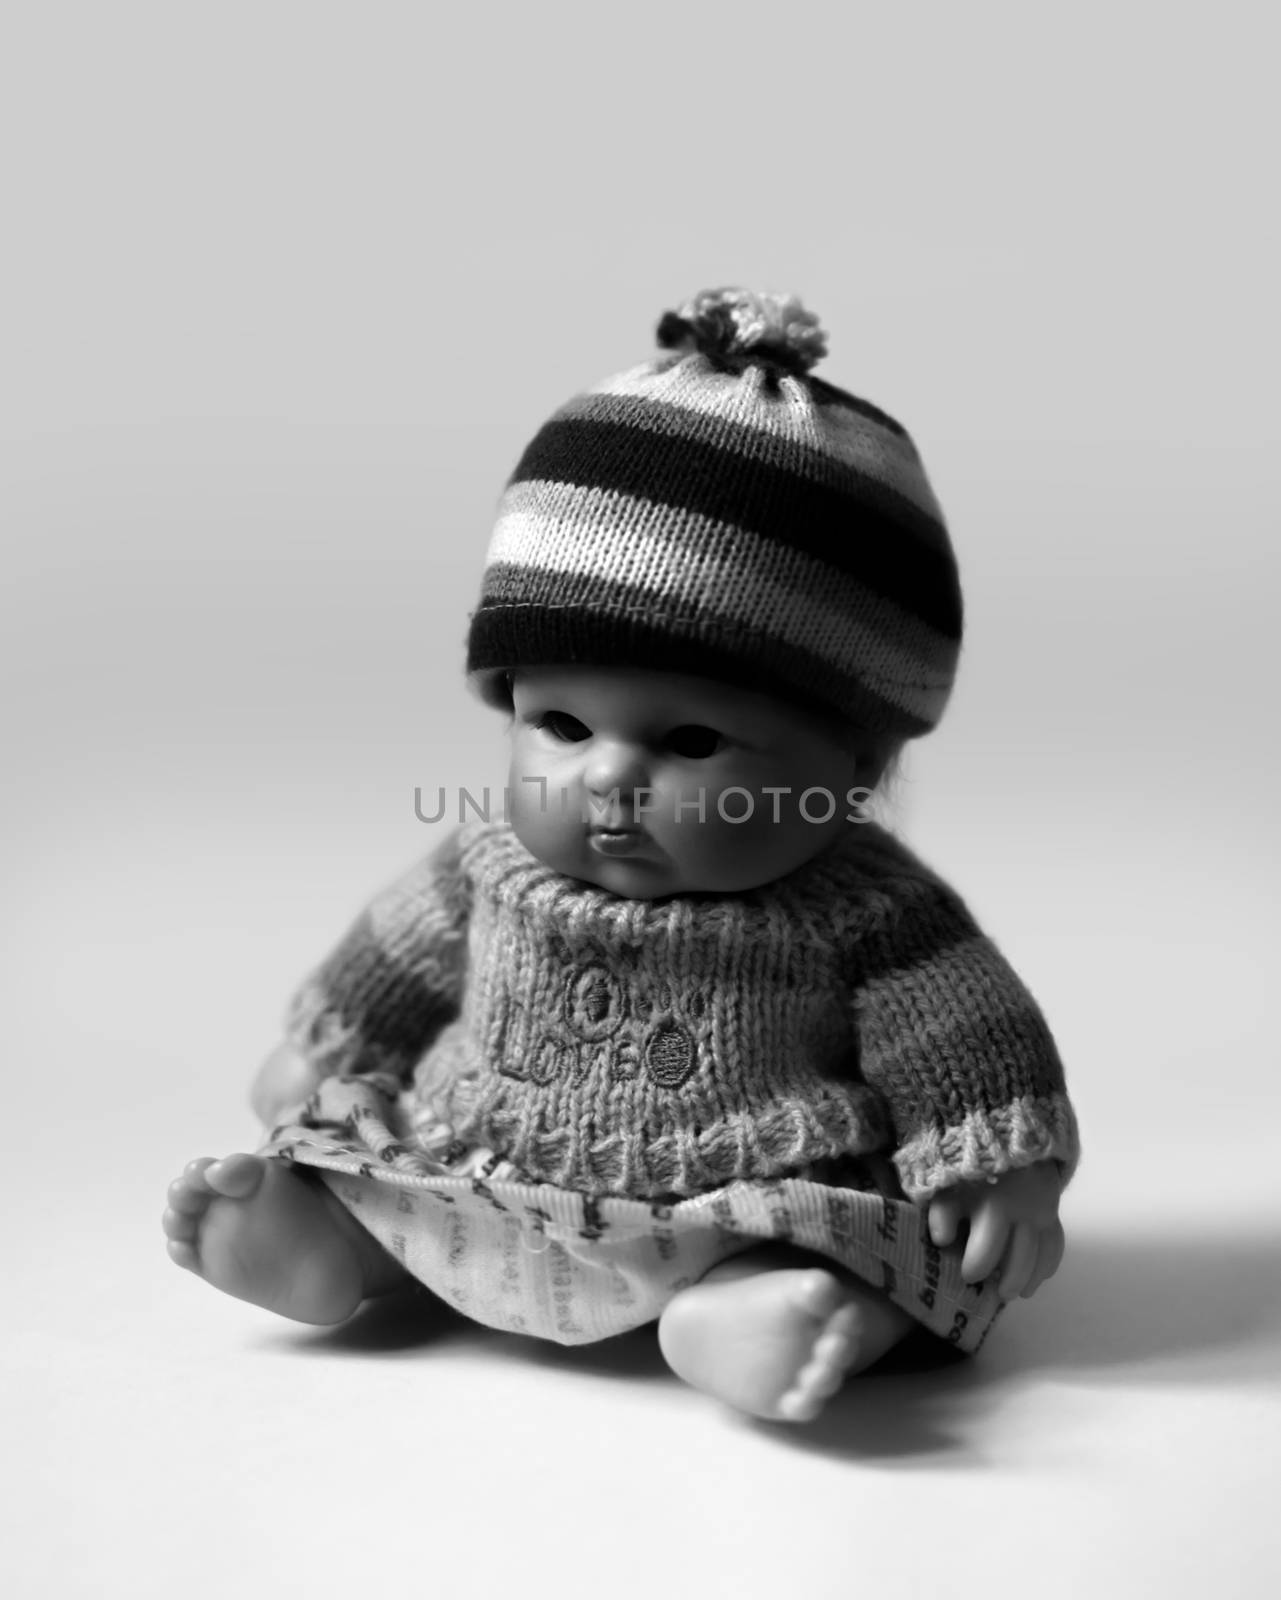 BLACK AND WHITE PHOTO OF SITTING DOLL